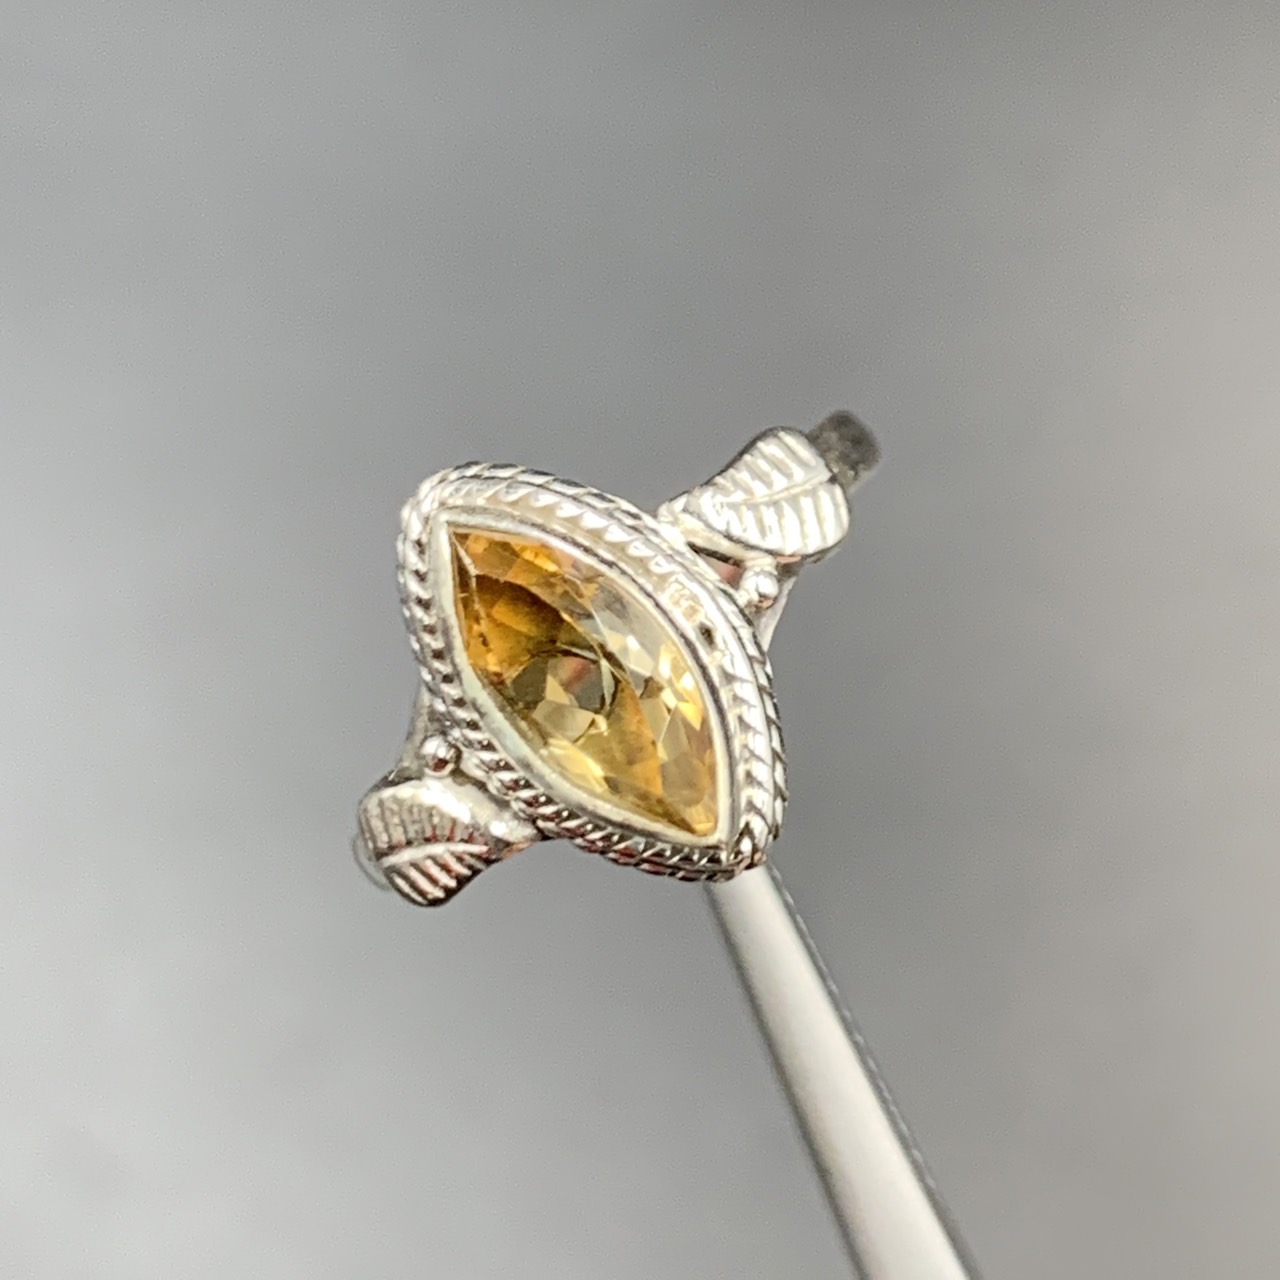 Natural Citrine & Silver Ring - Image 4 of 4